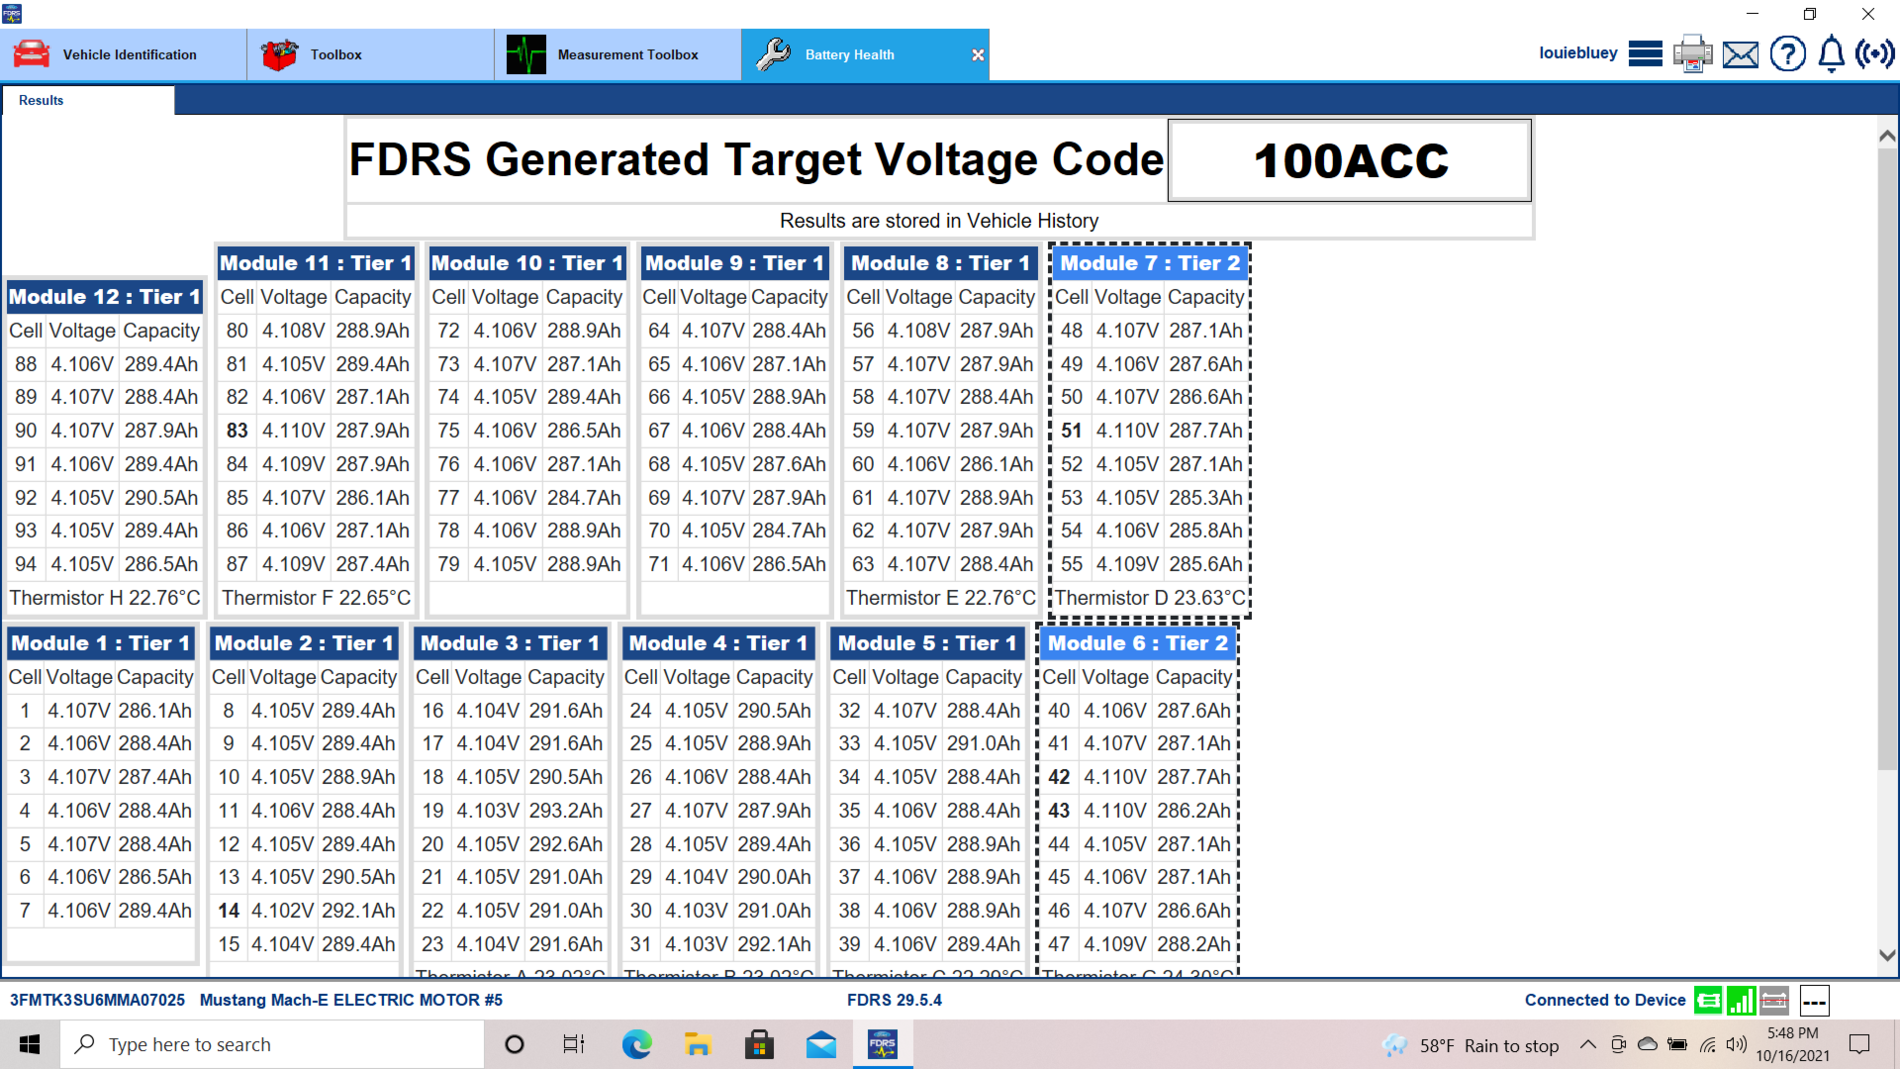 Ford Mustang Mach-E Battery Cell Voltages on FDRS Screenshot (29)